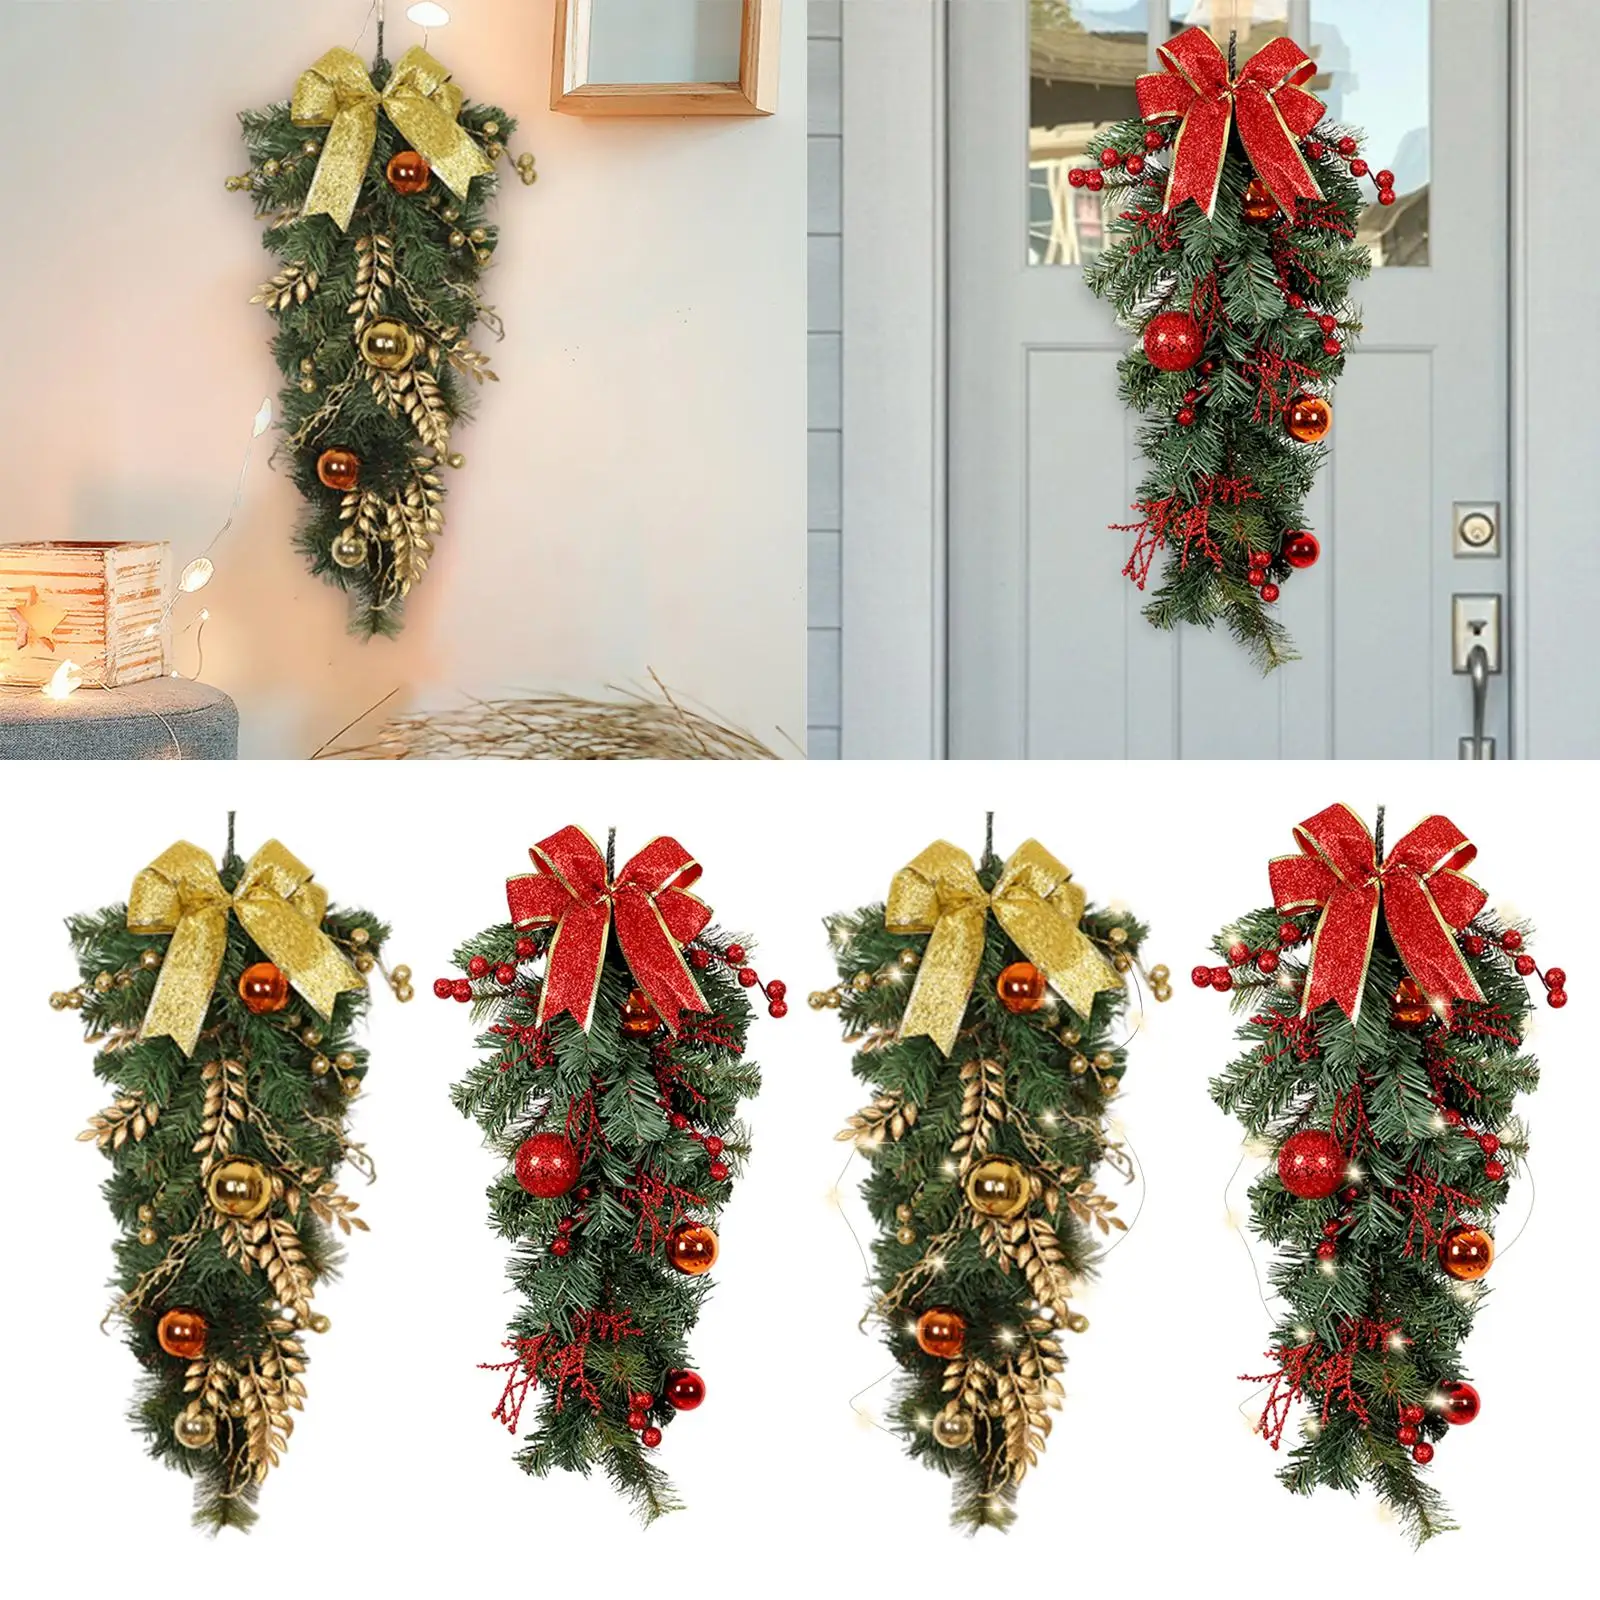 Hanging Christmas Upside Down Tree Home Decor Festival Artificial Wreath Xmas Wreath for Hotel Home Office Shopping Mall Windows